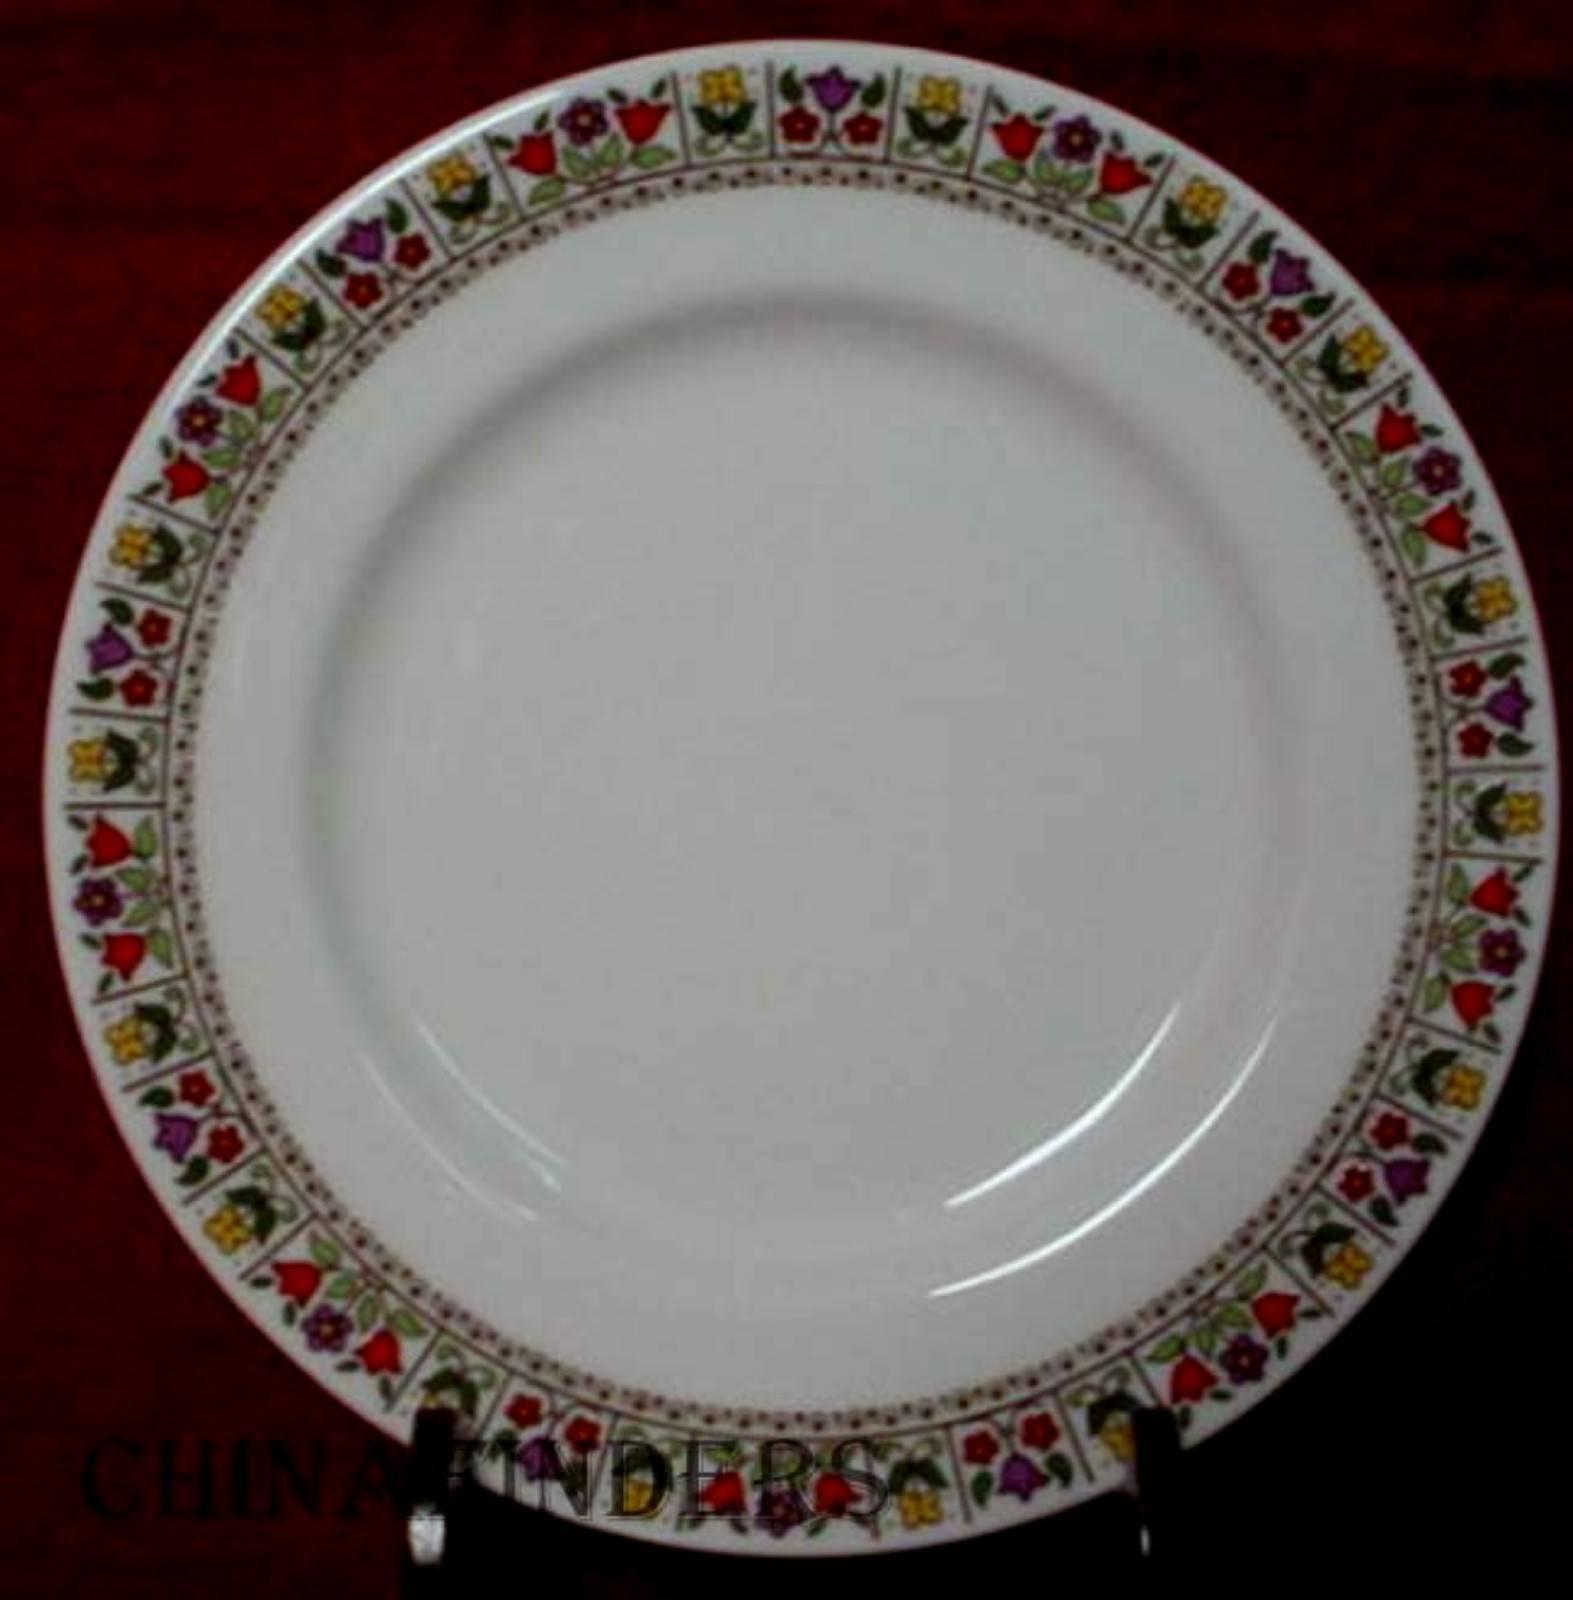 in great condition free from chips, cracks, breaks, stains, or discoloration.  Plates show some scratching as is usual with this pattern..

•Production dates: 1971 - 1982. 

• Includes 9 Cups, 9 Saucers, 9 Dinner Plates, 9 Salad Plates and 9